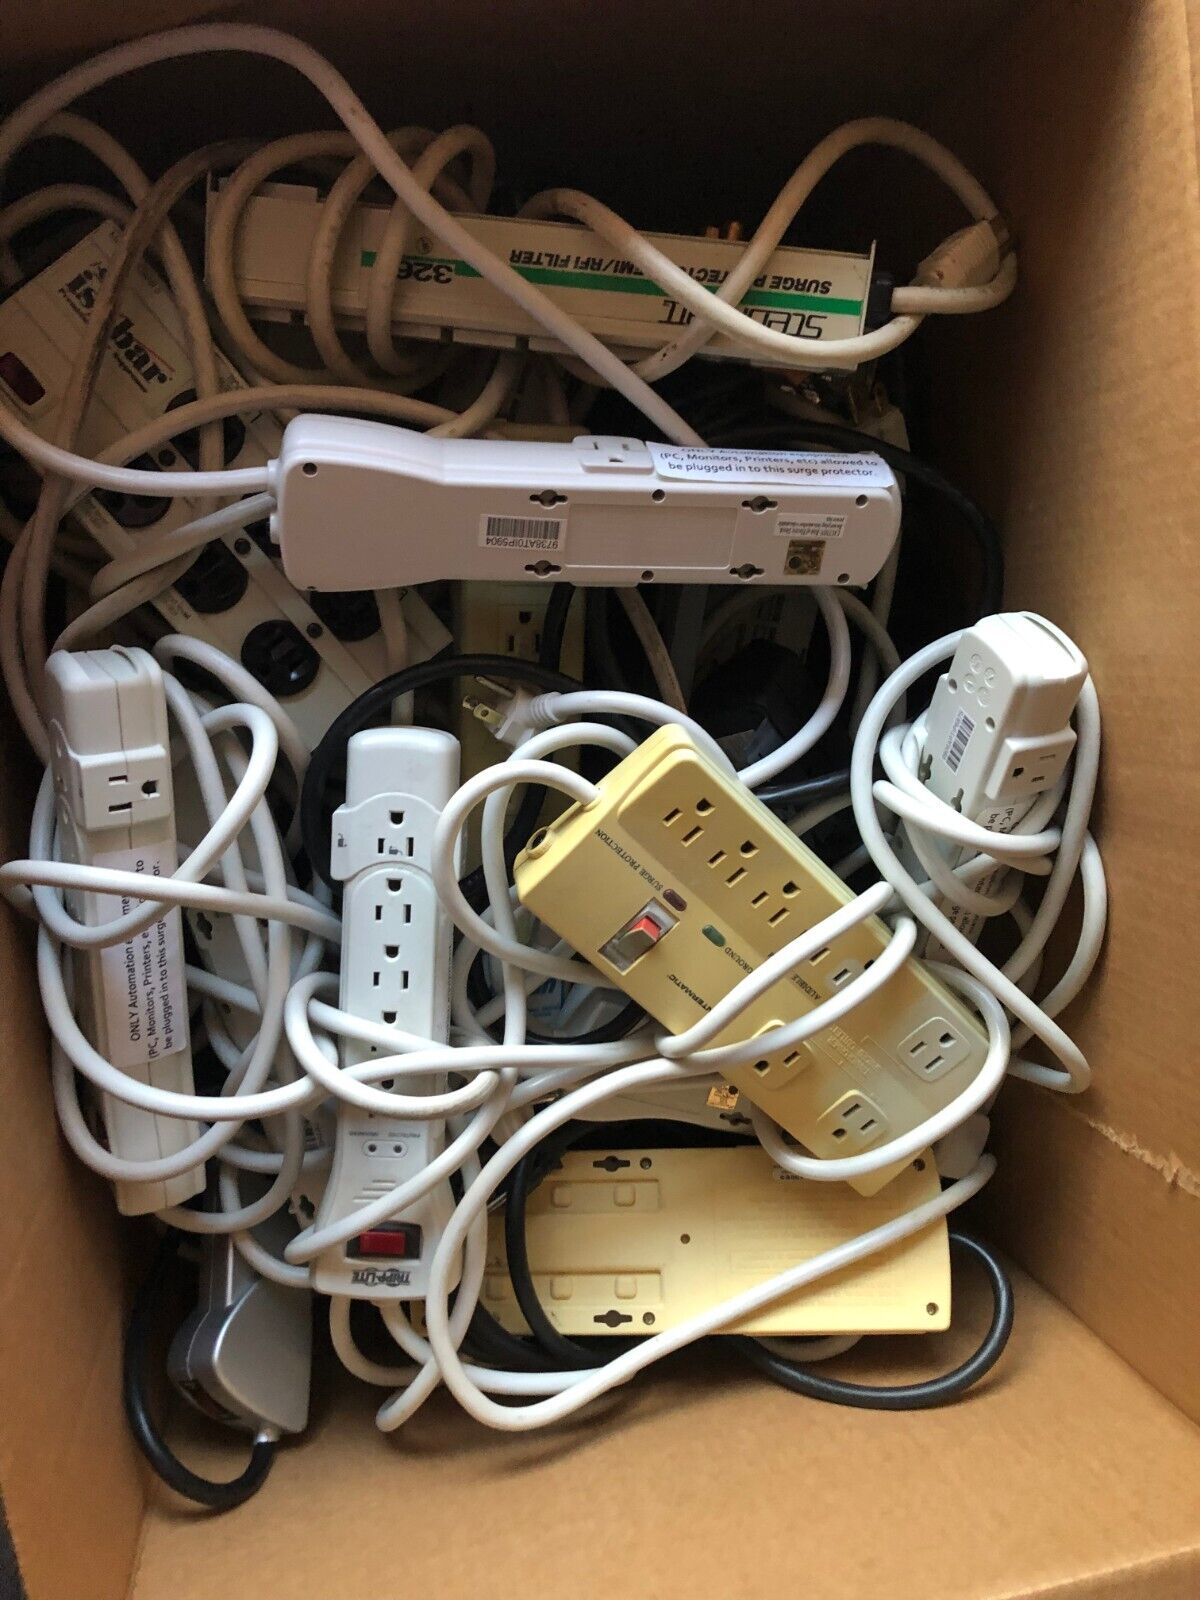 LOT-25 Power Strip Surge Protector Multi-Outlet Amps Mix Models On/Off Switch